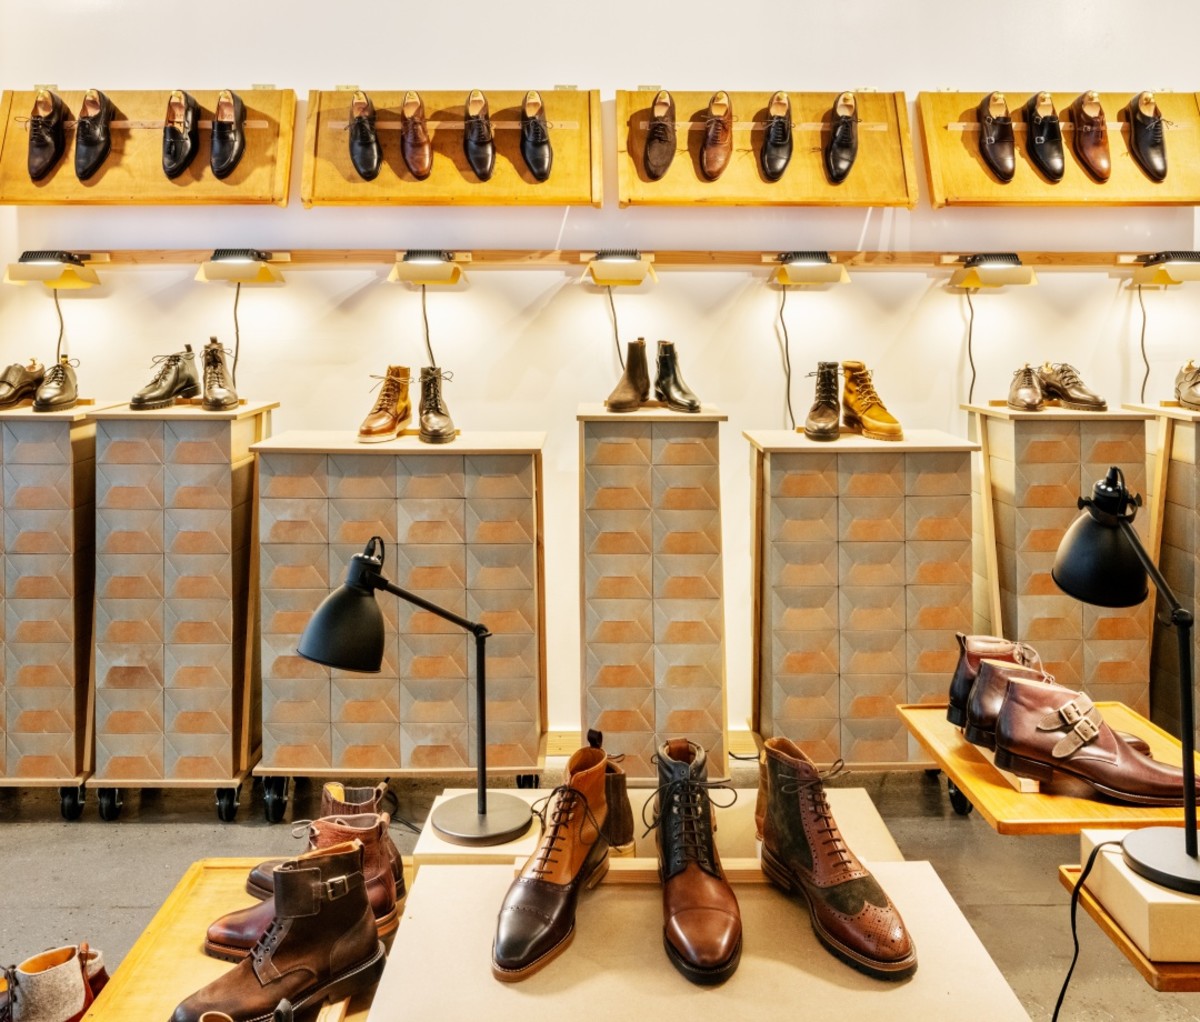 Shoes on display in the Le Majordome store